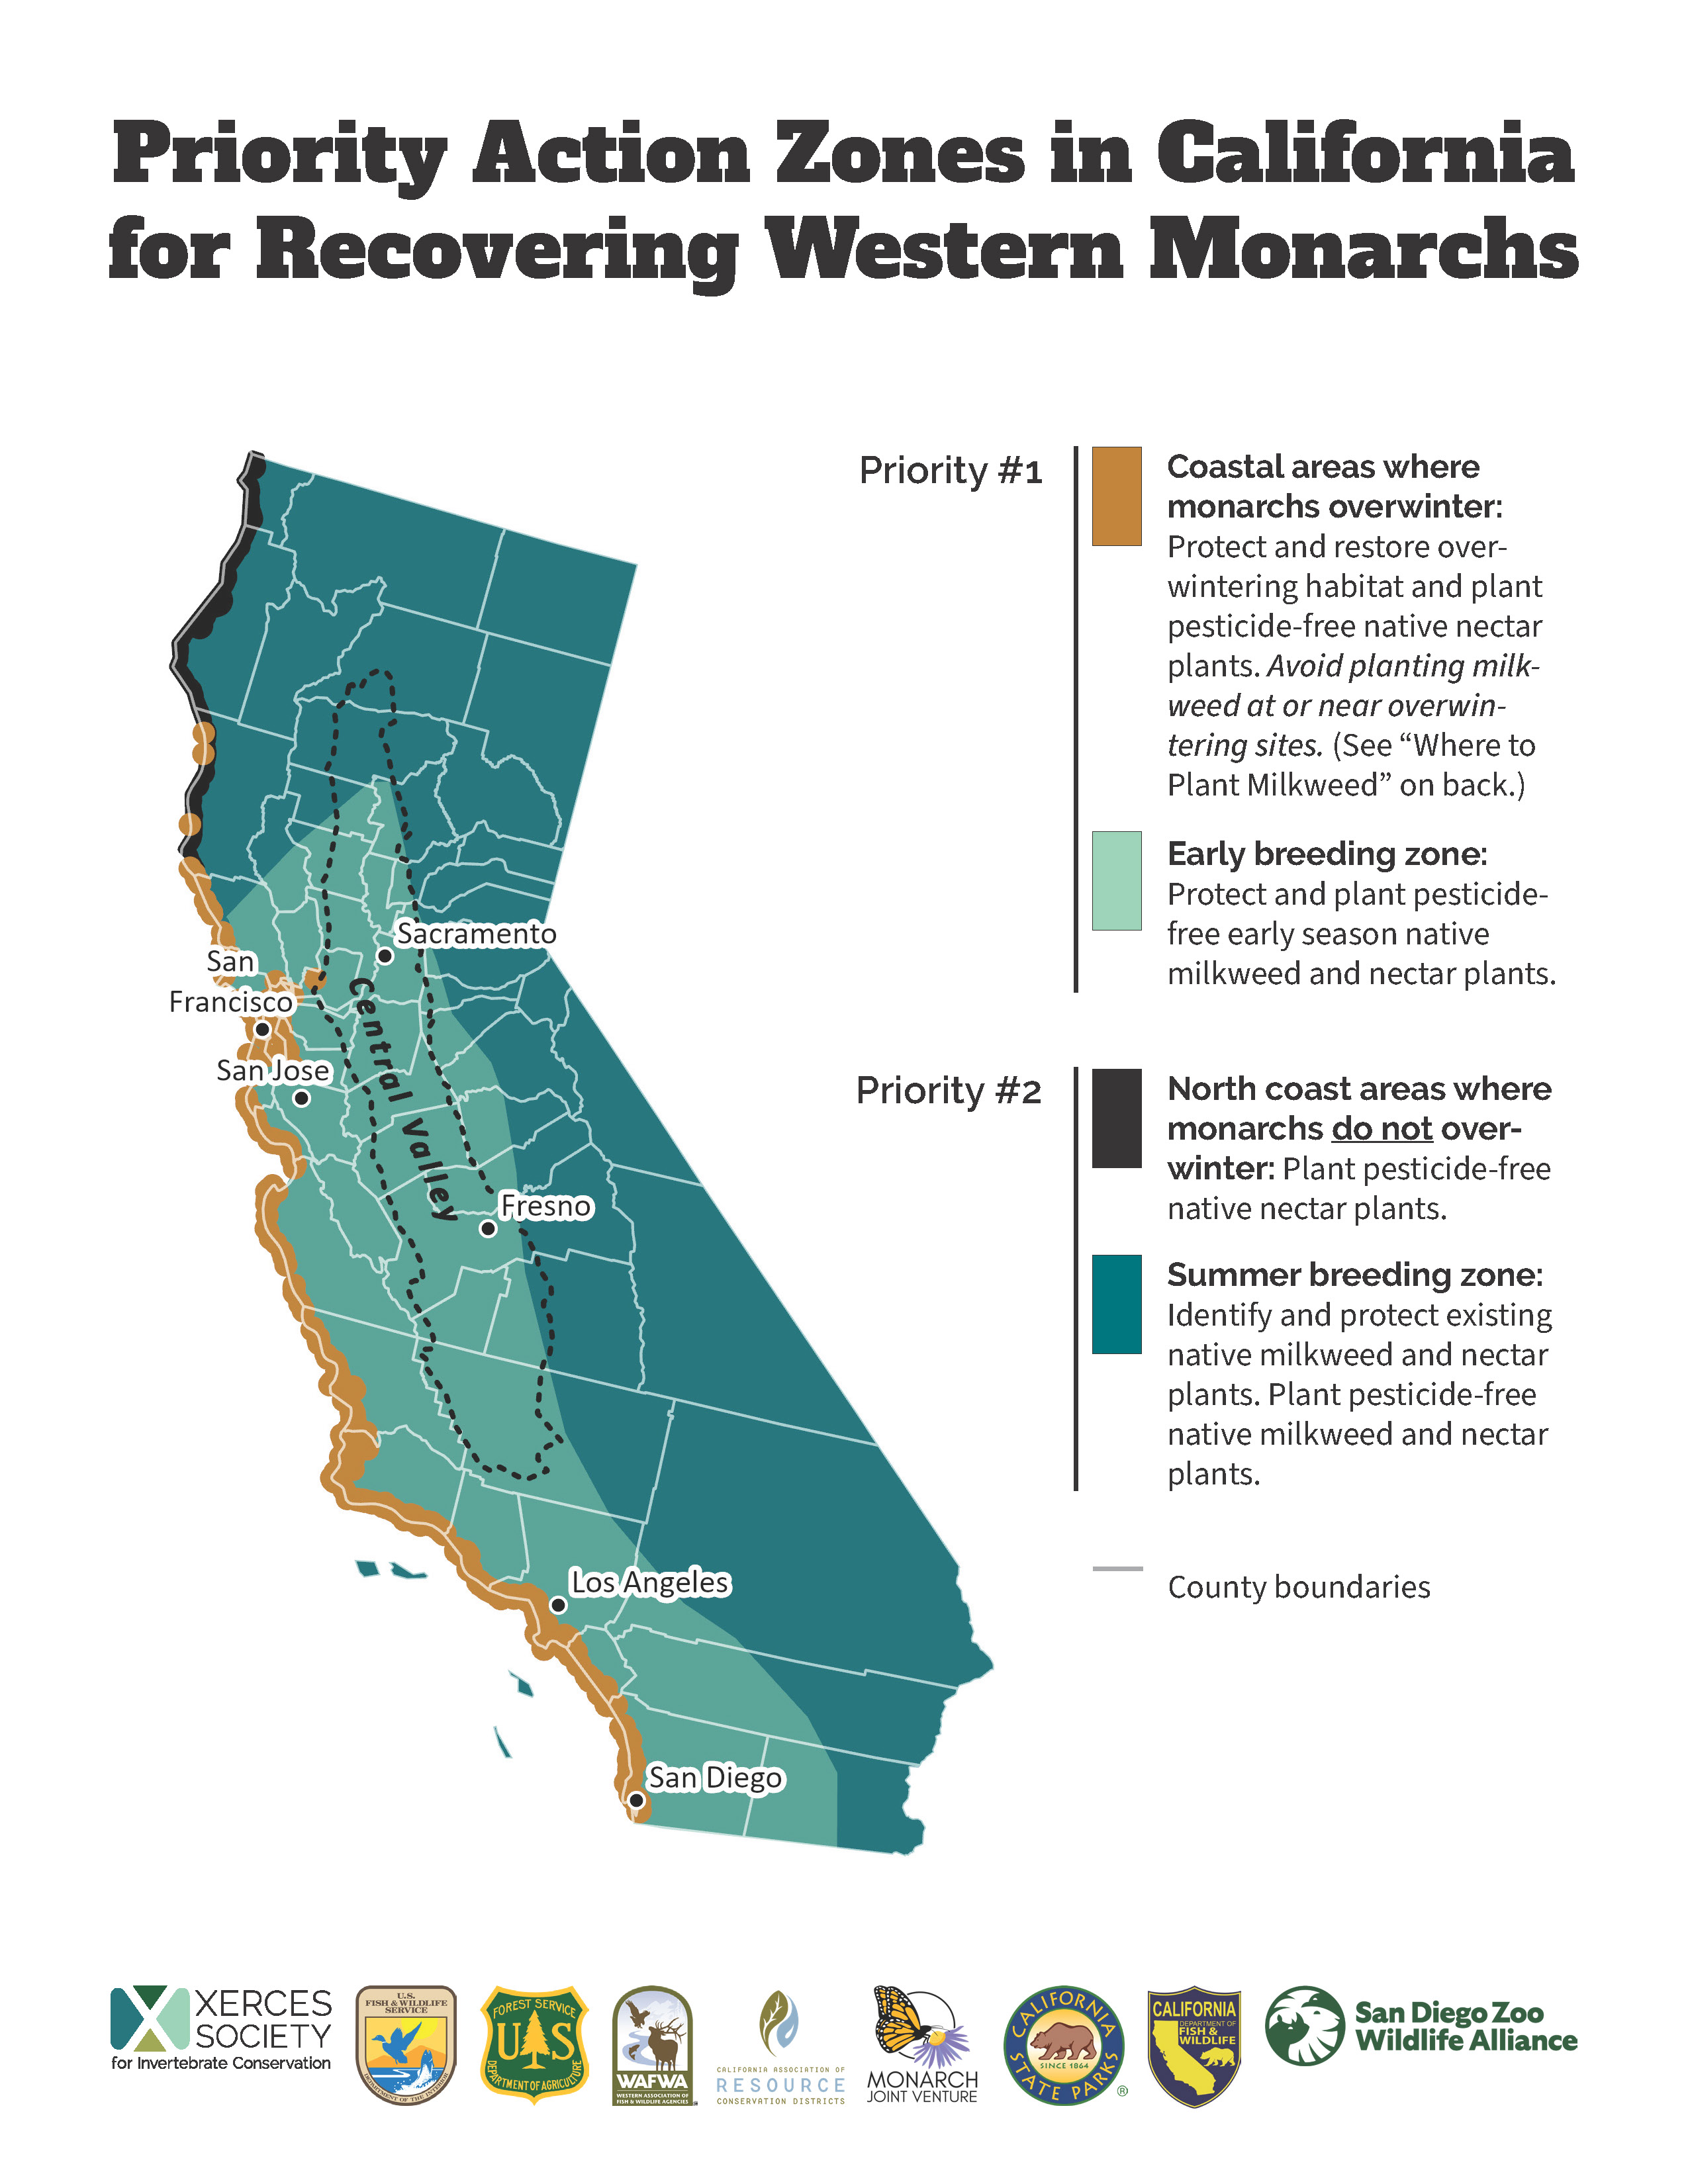 Priority Action Zones in California for Recovering Western Monarchs map